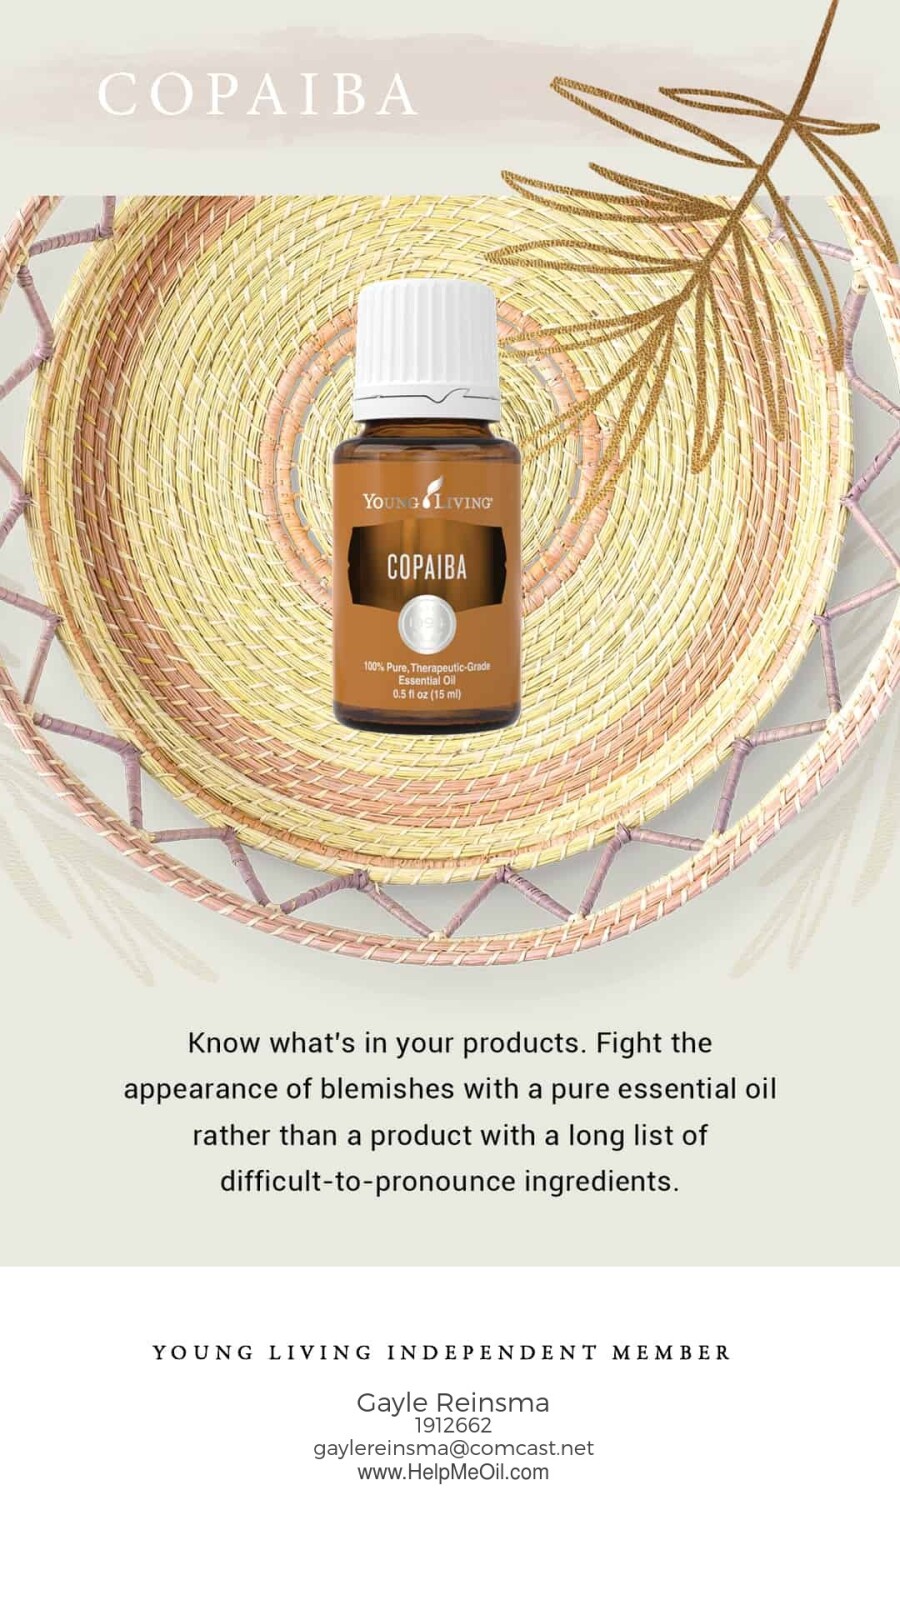 Copaiba - an oil you may not know much about but MUST learn!